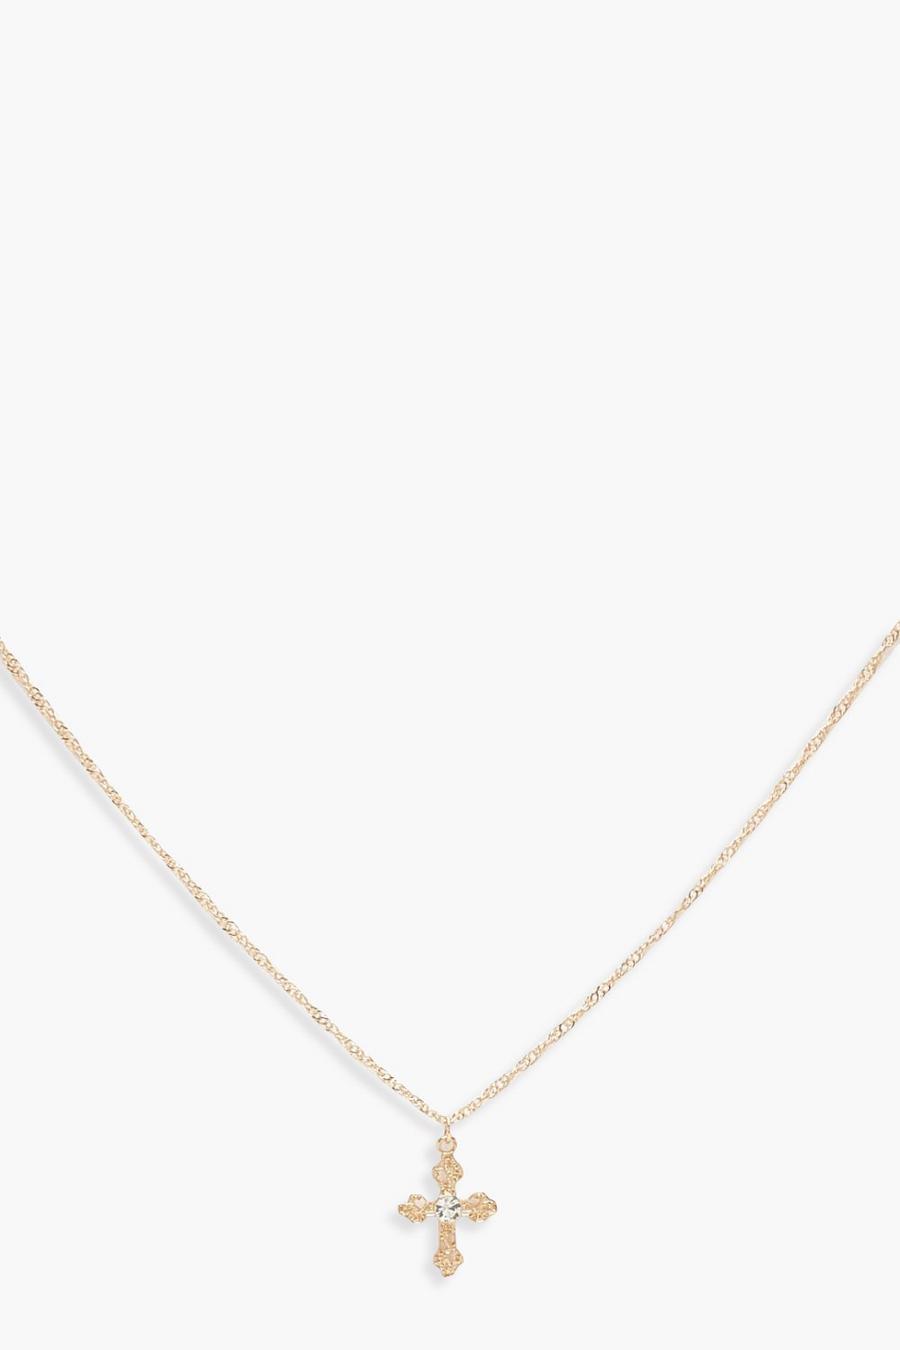 Gold Layered Snake Chain Necklaces